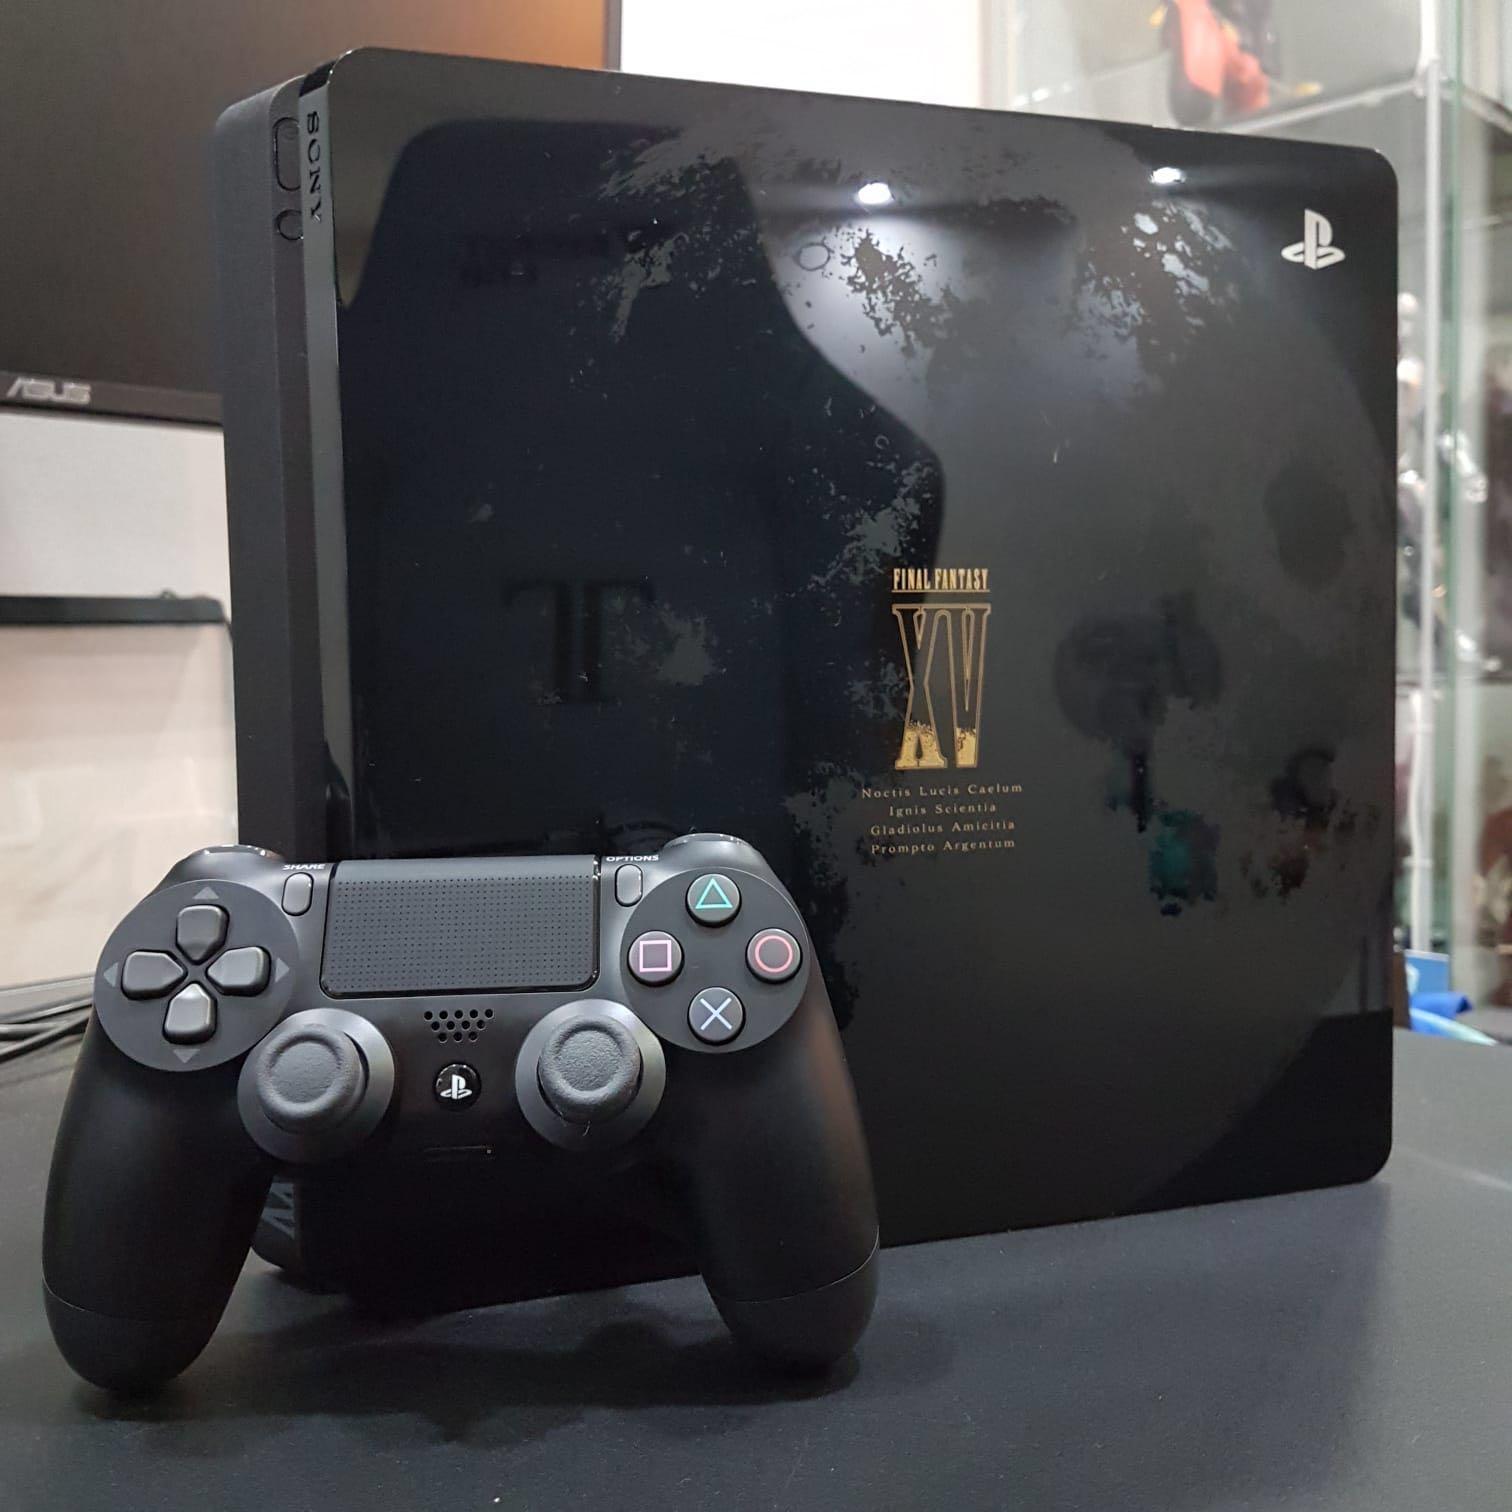 ps4 slim 1tb pre owned